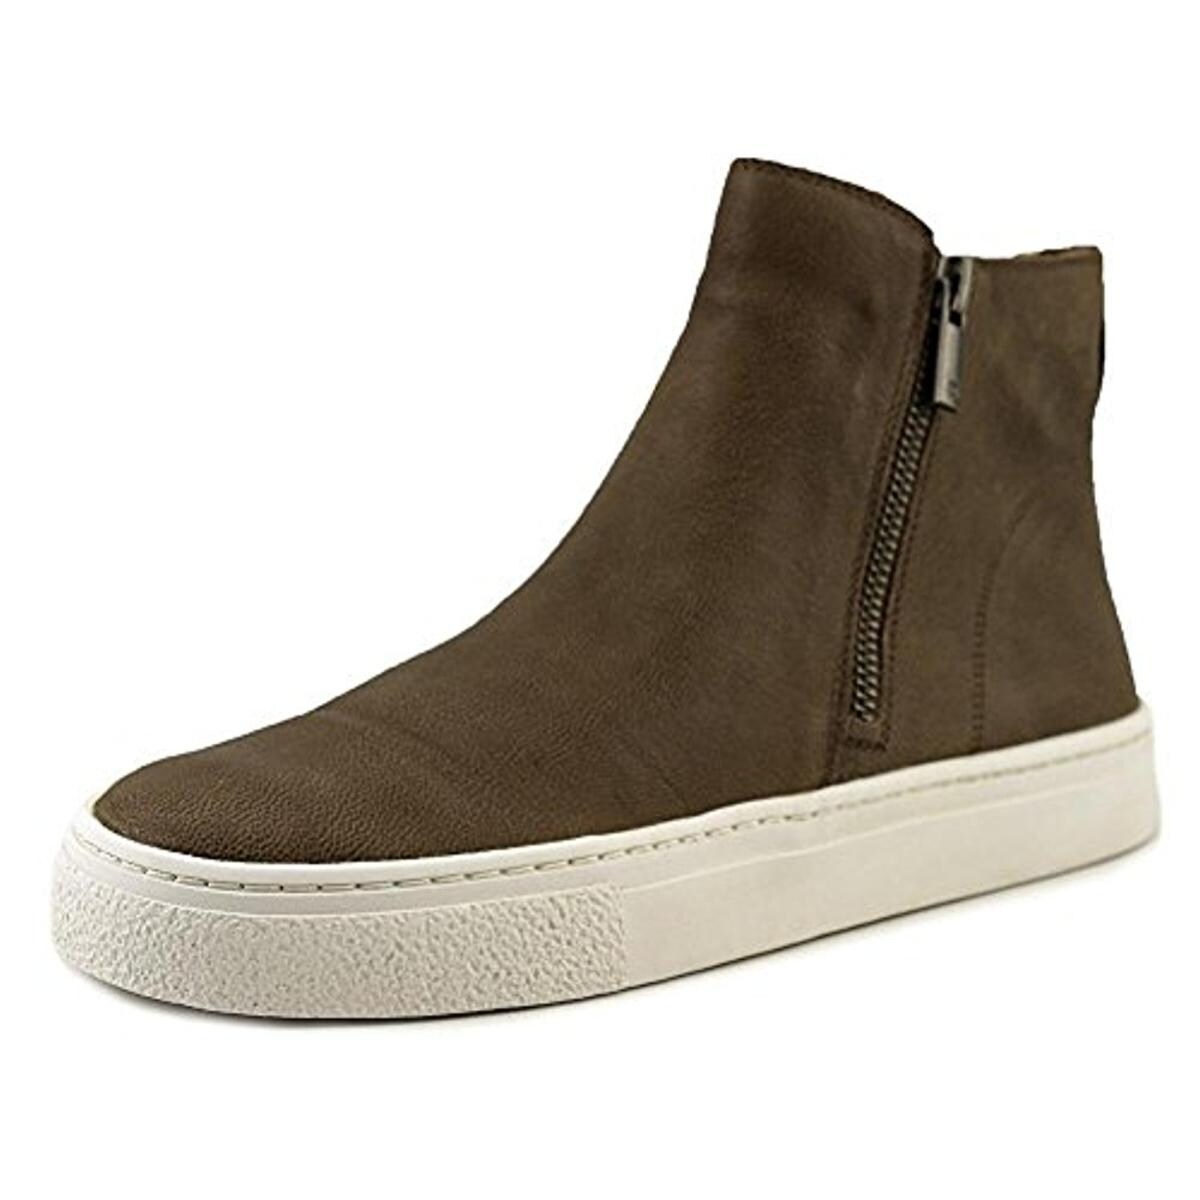 lucky brand shoes the bay